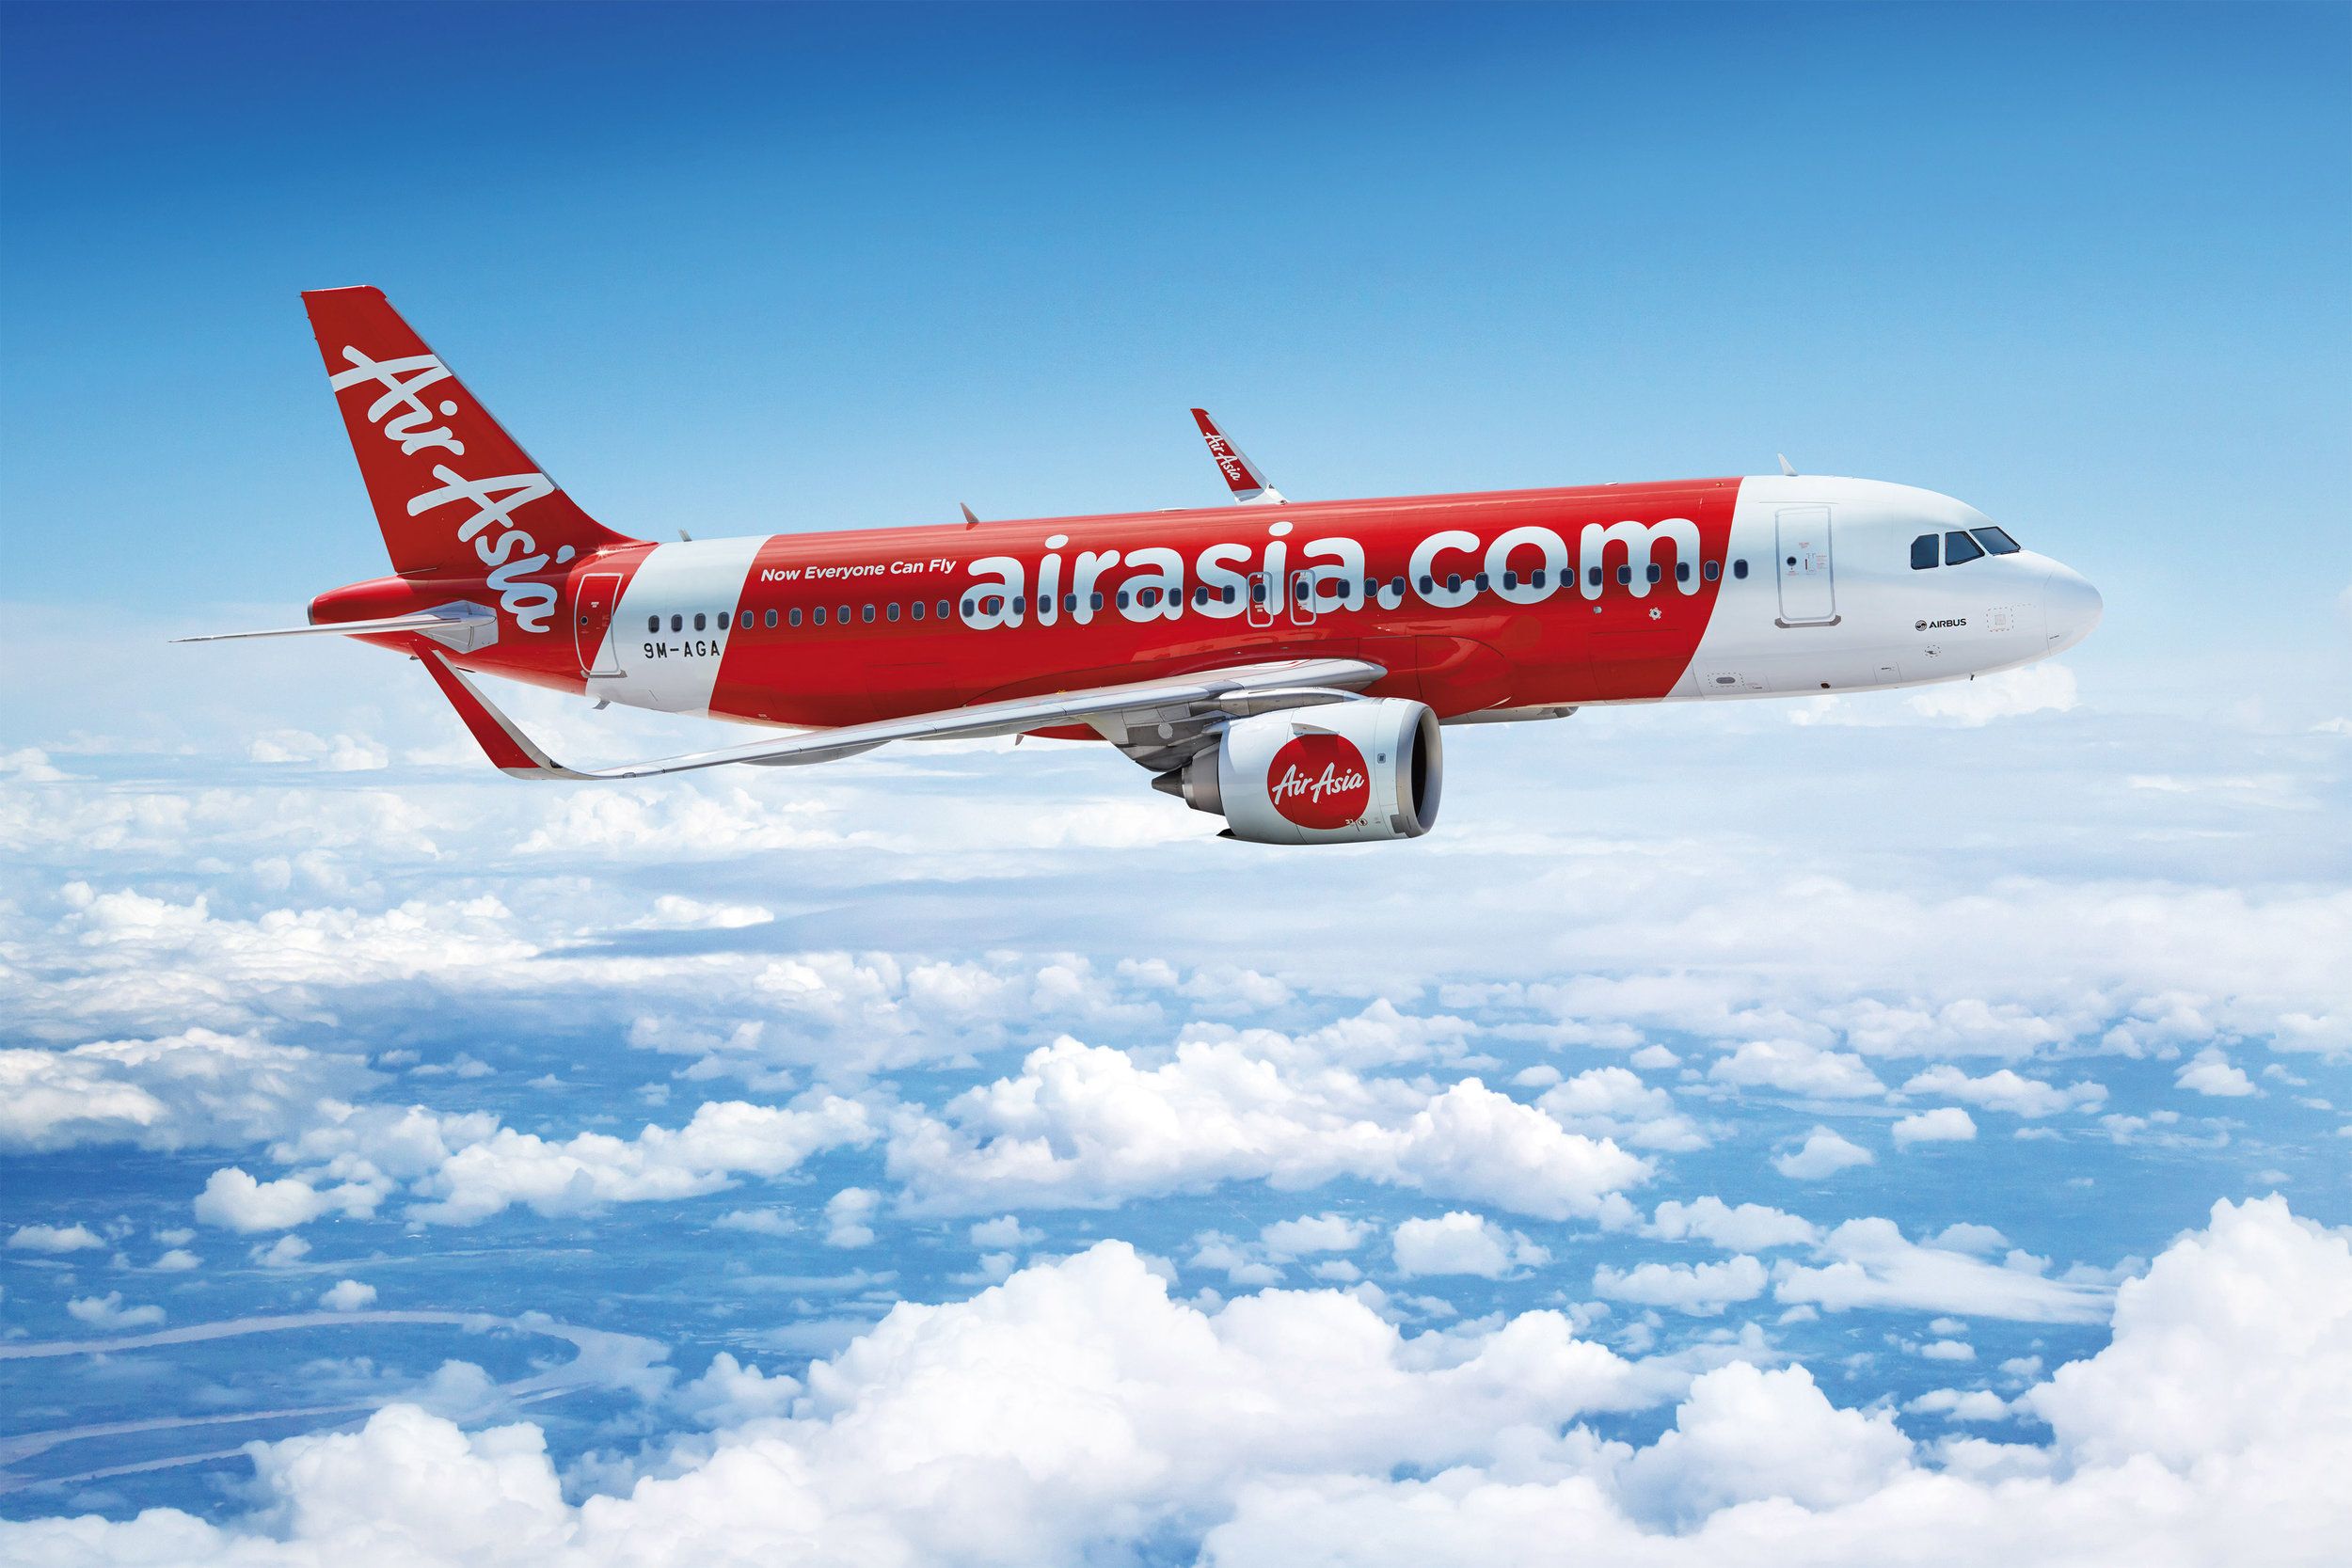 An AirAsia Airbus A320 flying in the sky.